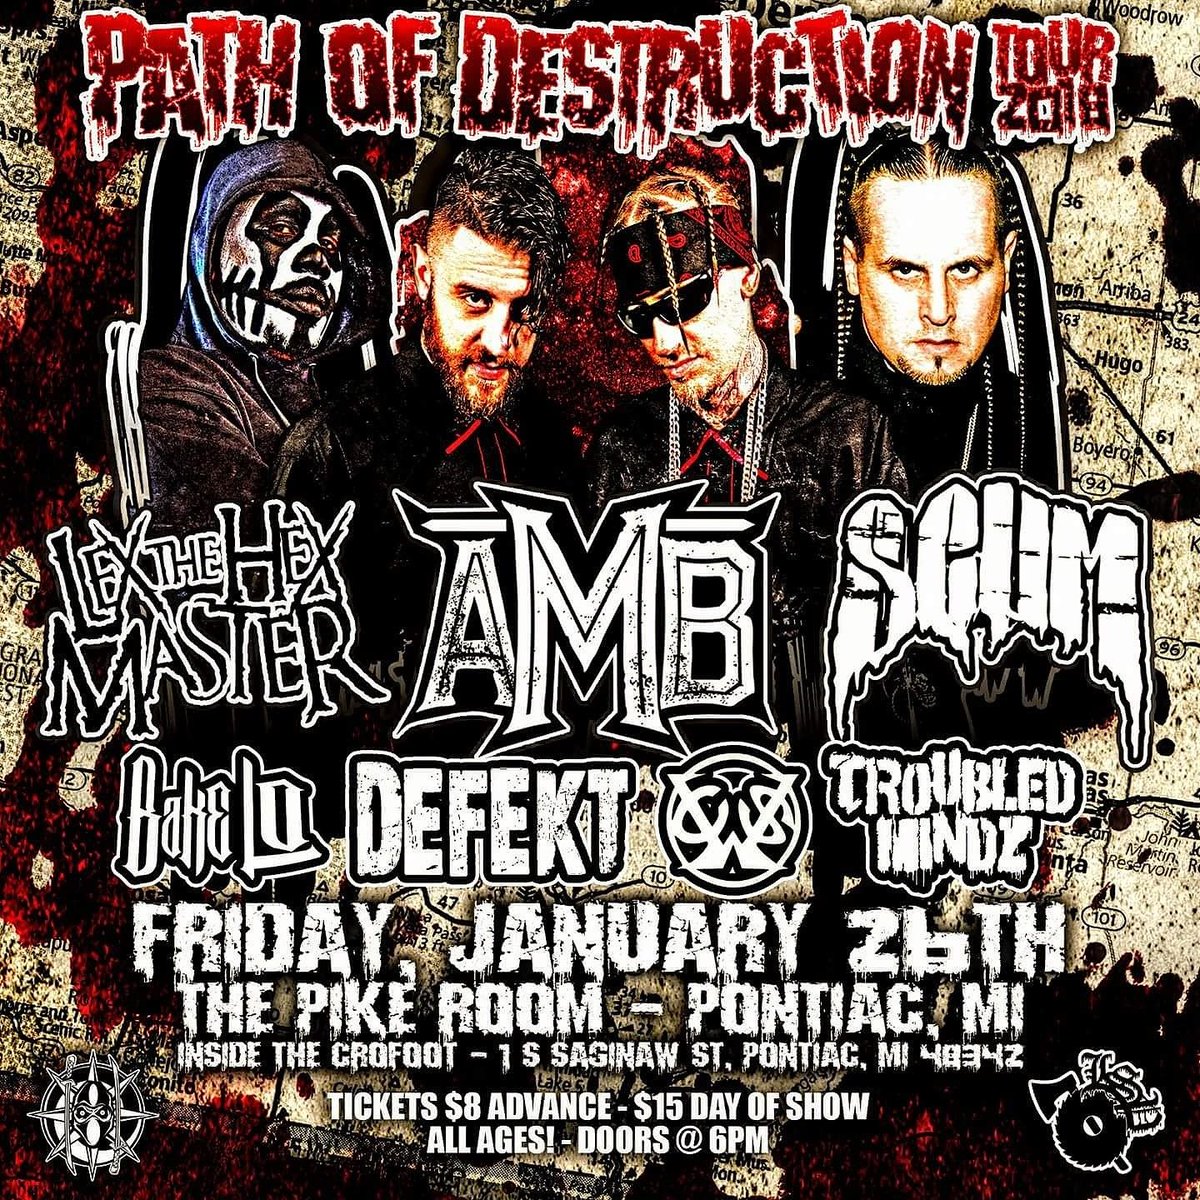 January 26 at the Pike Room #thepathofdestruction tour hits Pontiac Mi with @ohnoitsbakelo @that1killa @MurderHouse1999 #TroubledMindz along with @AxeMurderBoyz @SCUM412 and @lexthehexmaster #MNE #LSP #MHR and more! Tickets available for only $8